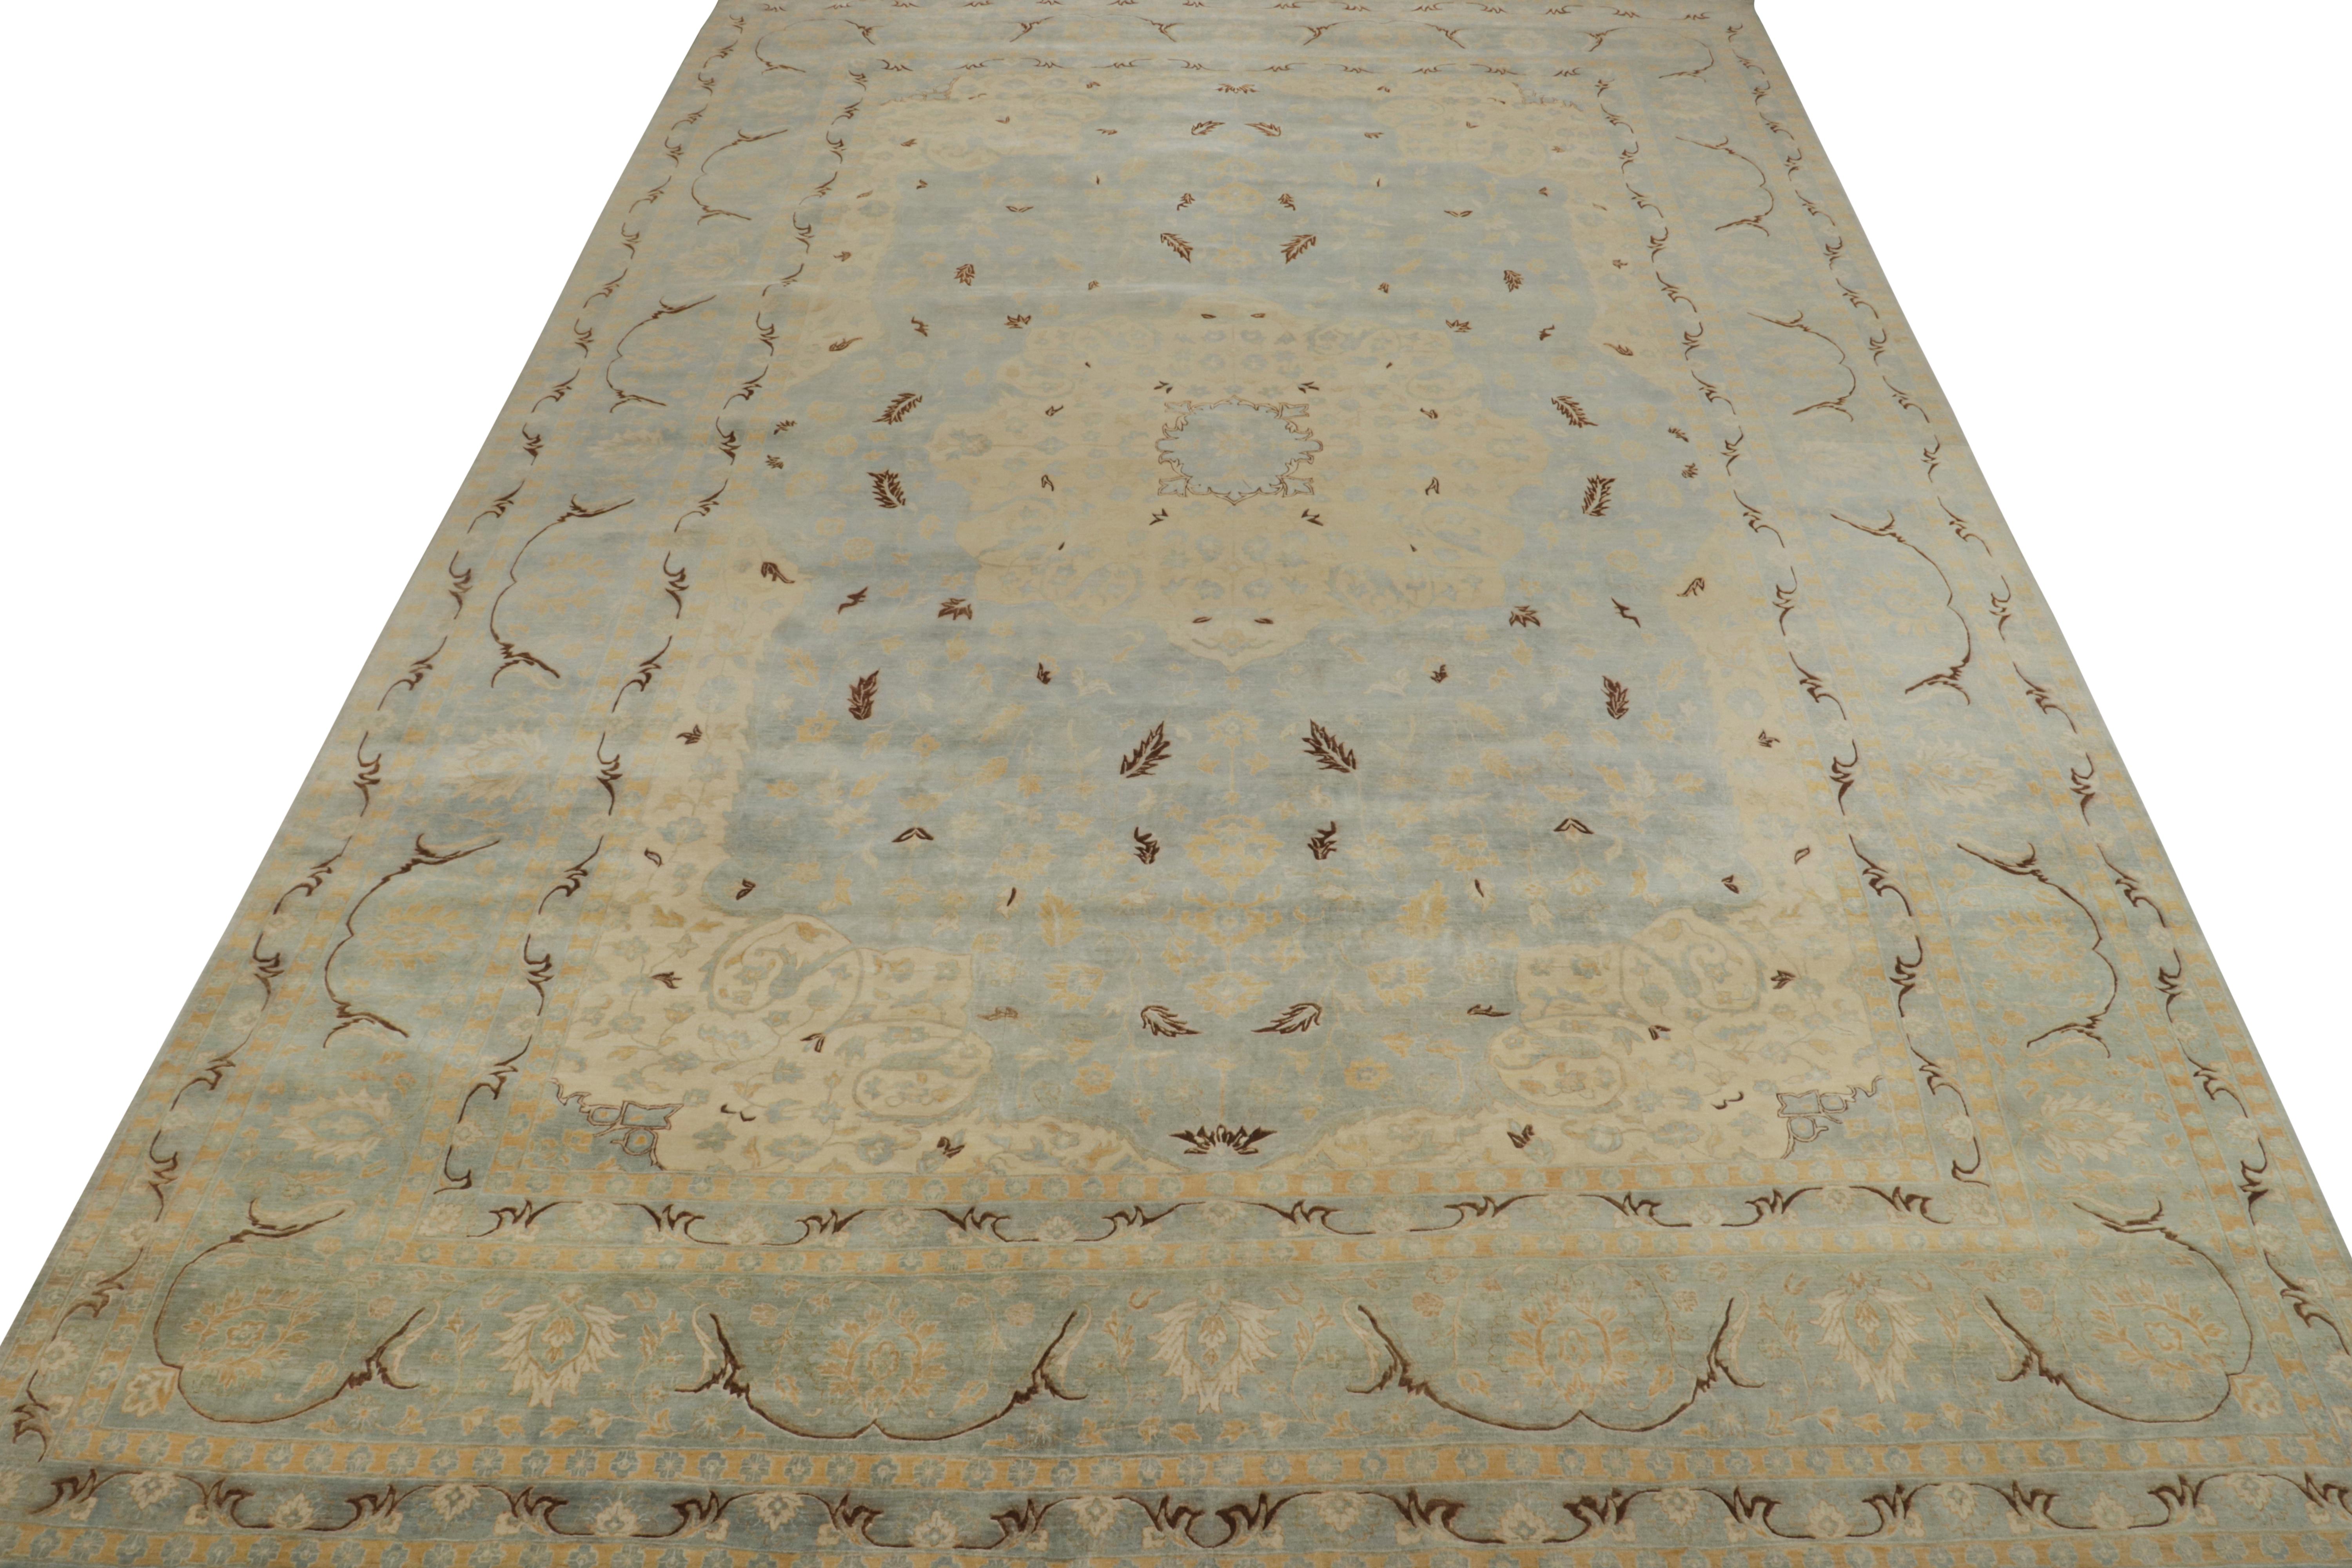 This 12x18 hand-knotted wool rug from our Modern Classics collection enjoys an inventive reimagining of antique Tabriz Persian rugs. 

The drawing depicts the celebrated Herati pattern, recaptured in the most alluring play of blue, beige, gold, and